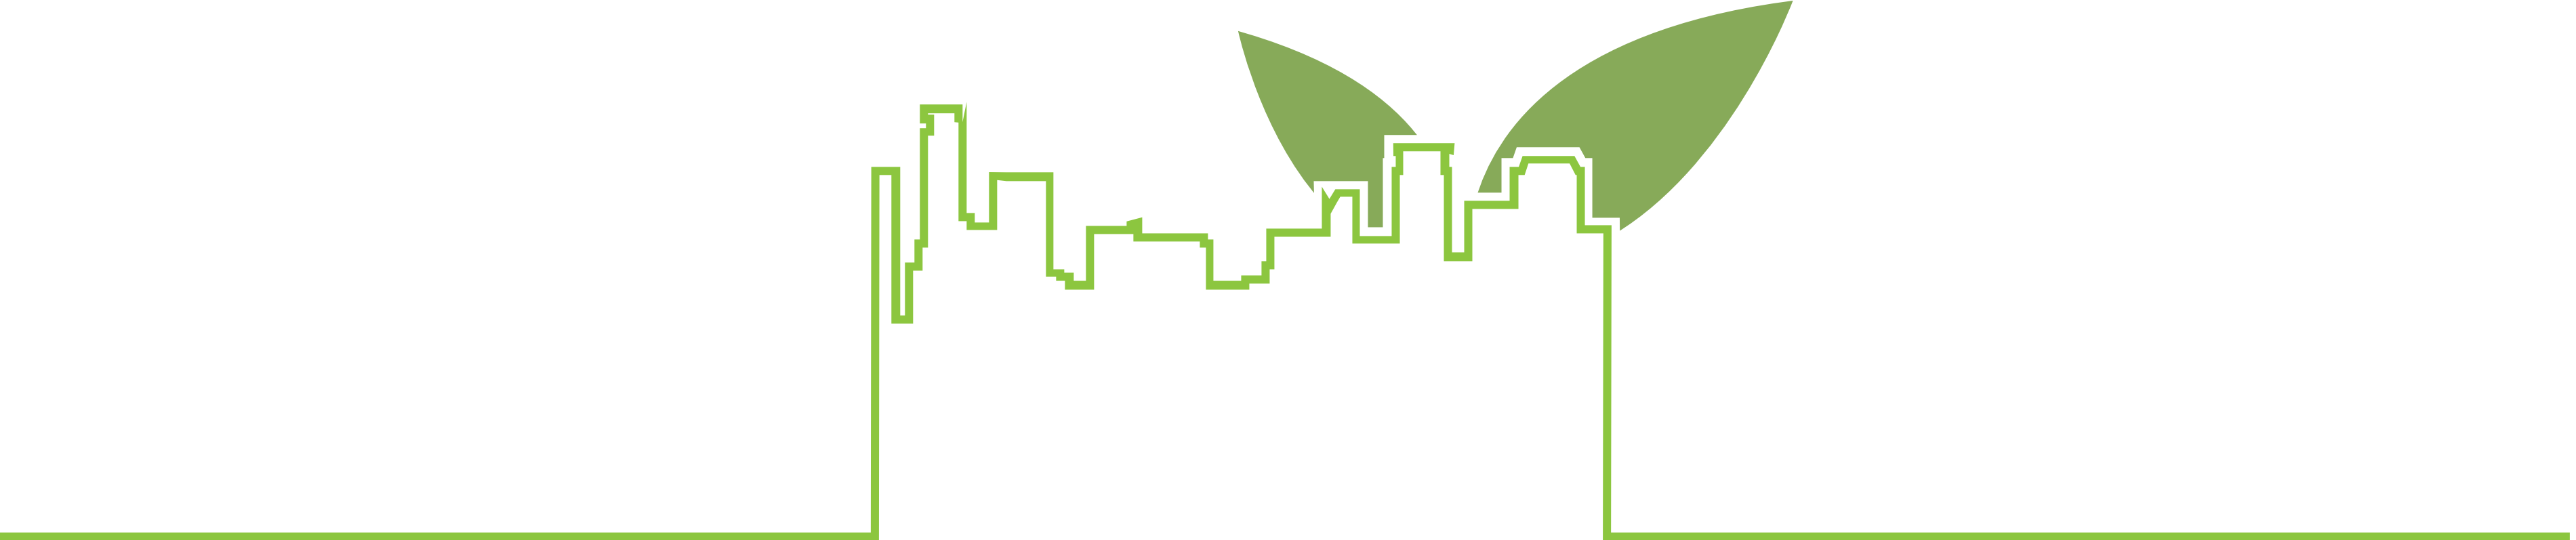 Micro City Greens Logo white Finished